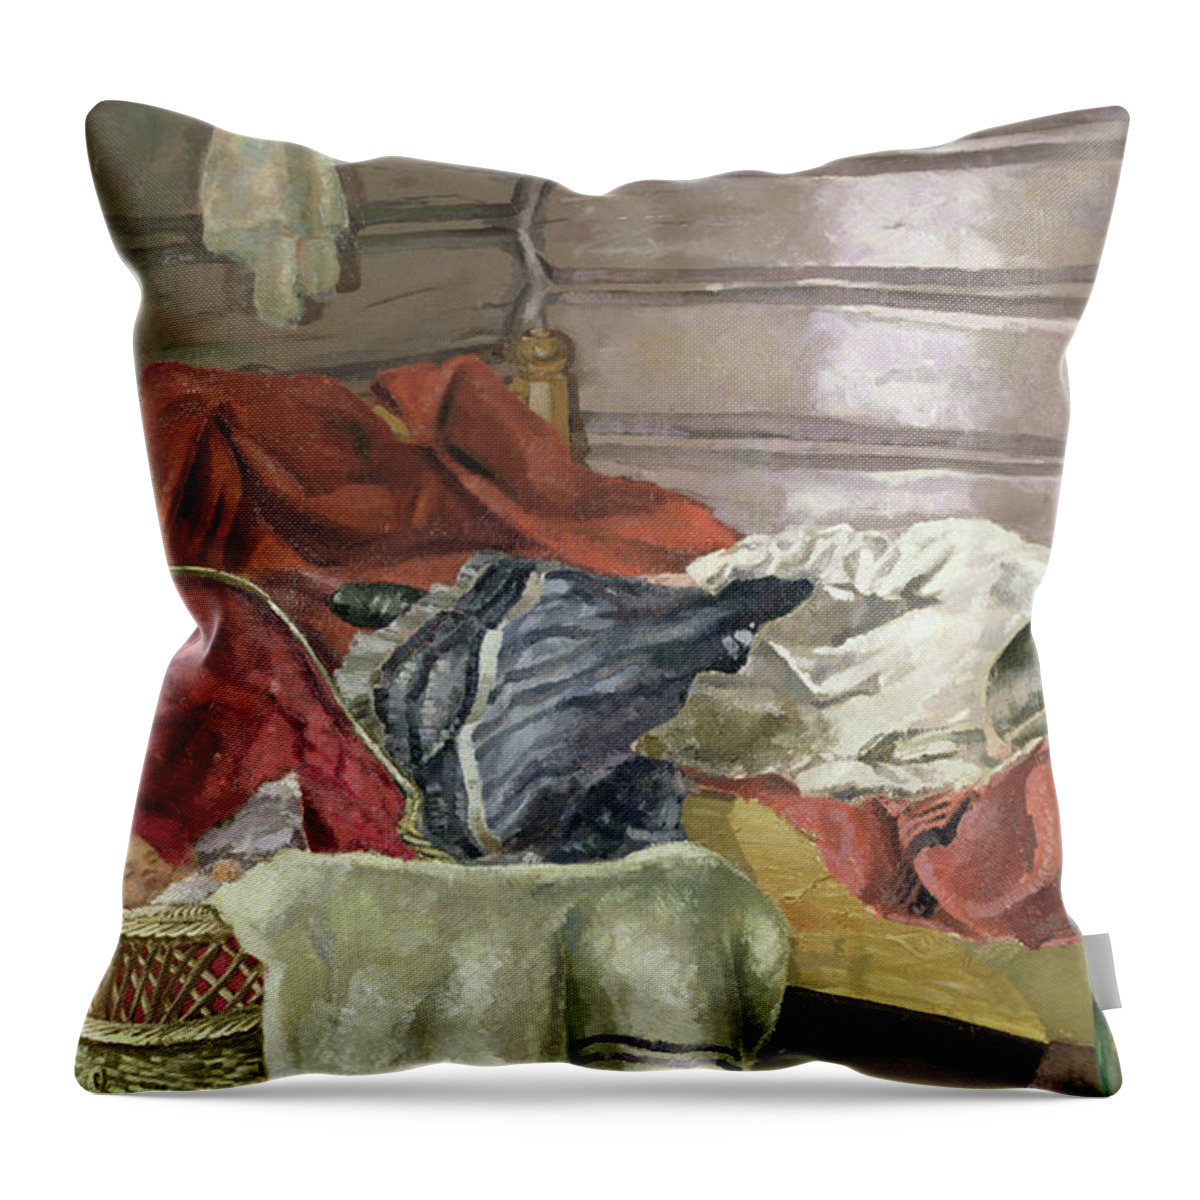 What to Do With Throw Pillows at Night